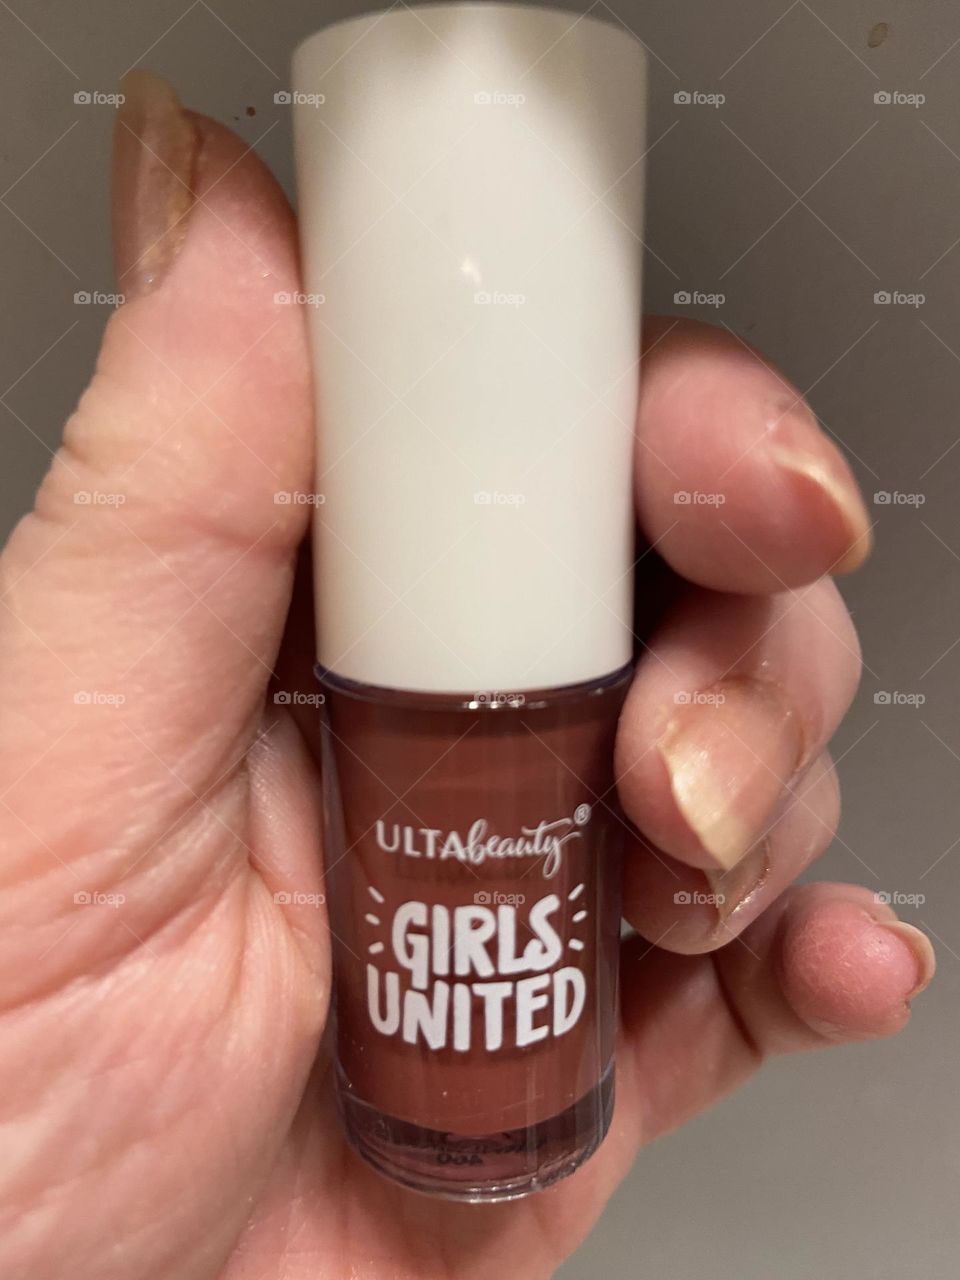 My hand holding Ulta Beauty Girls United Lip Gloss in Unfiltered. This was part of a collaboration with Essence Magazine created by 6 teens through a special mentoring initiative per the information on the package. The kit featured 2 different looks.